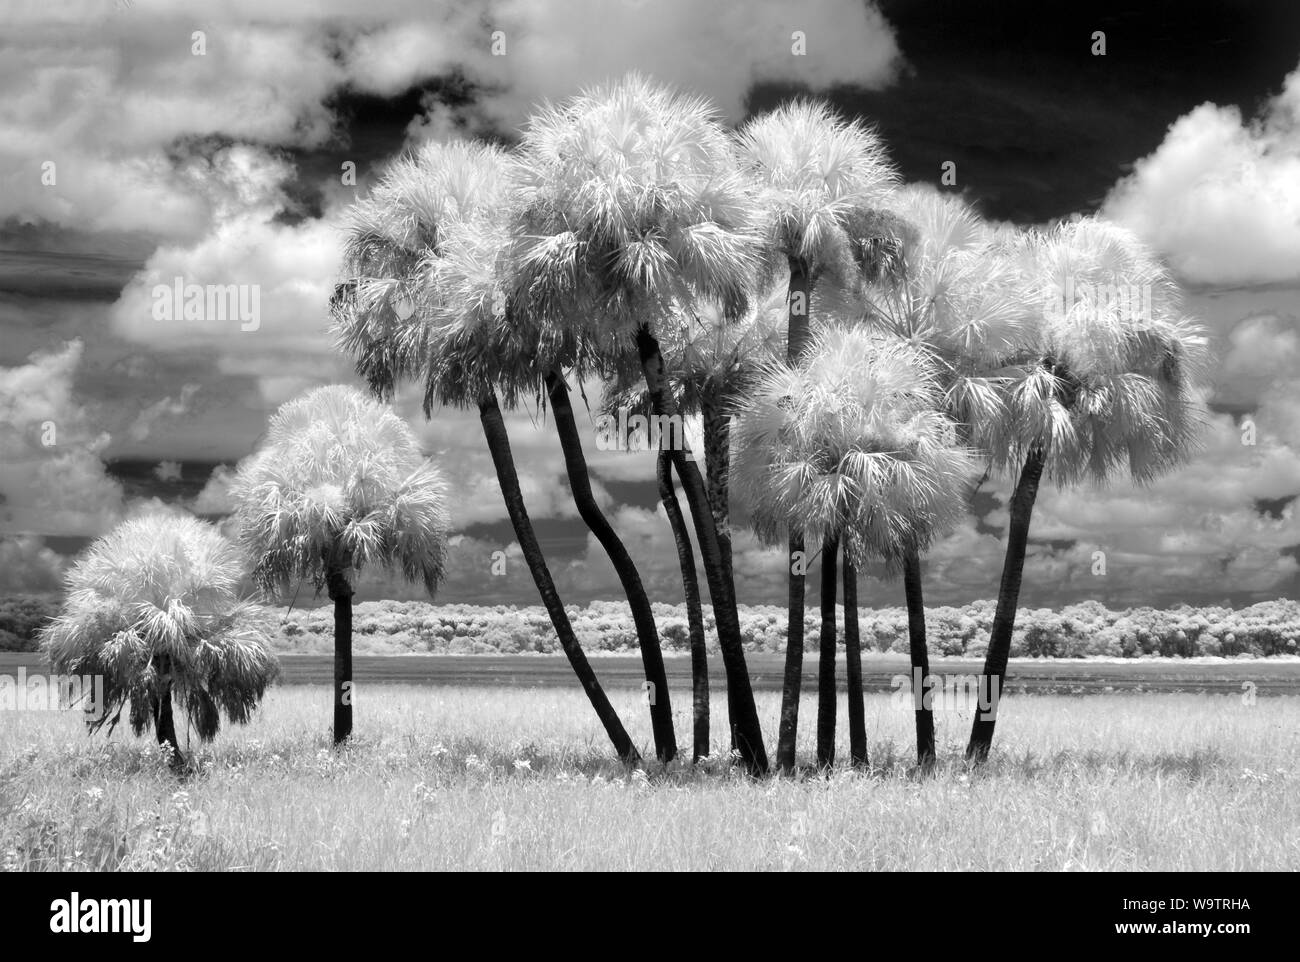 Scene at Myakka River State Park in Sarasota Florida taken as an Infrared red image and converted to black and white Stock Photo